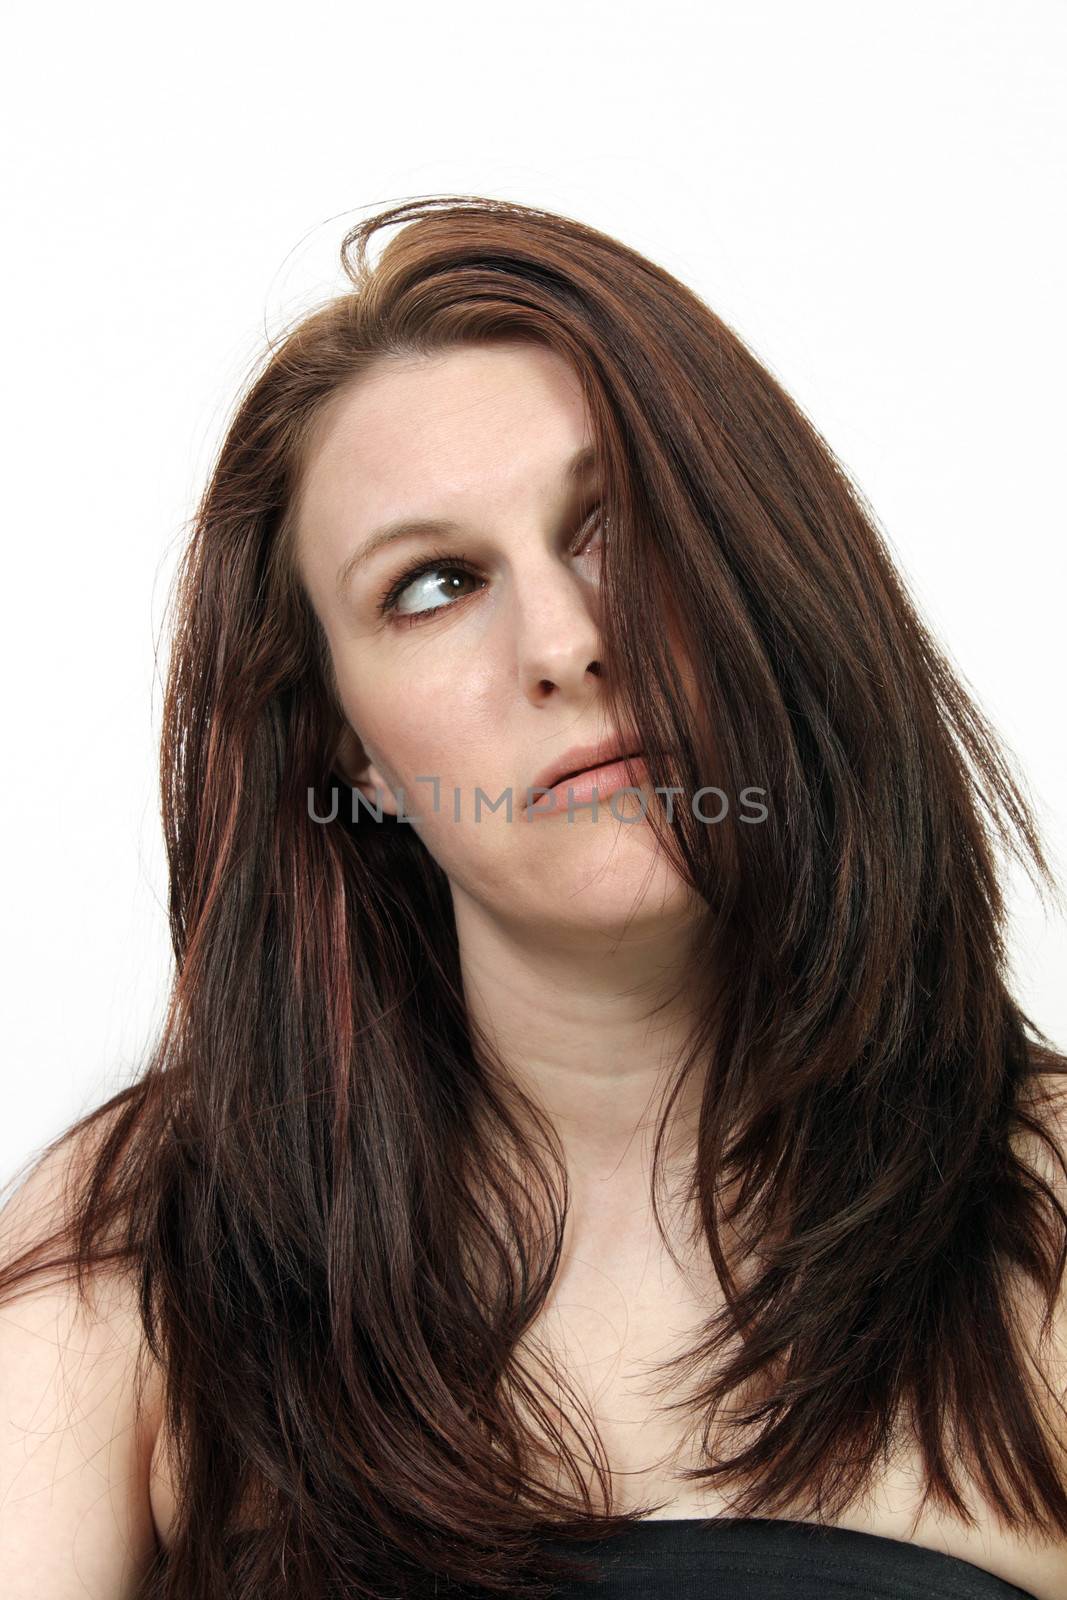 A close-up of a beautiful young brunette who appears to be tired, frustrated, or frazzled.